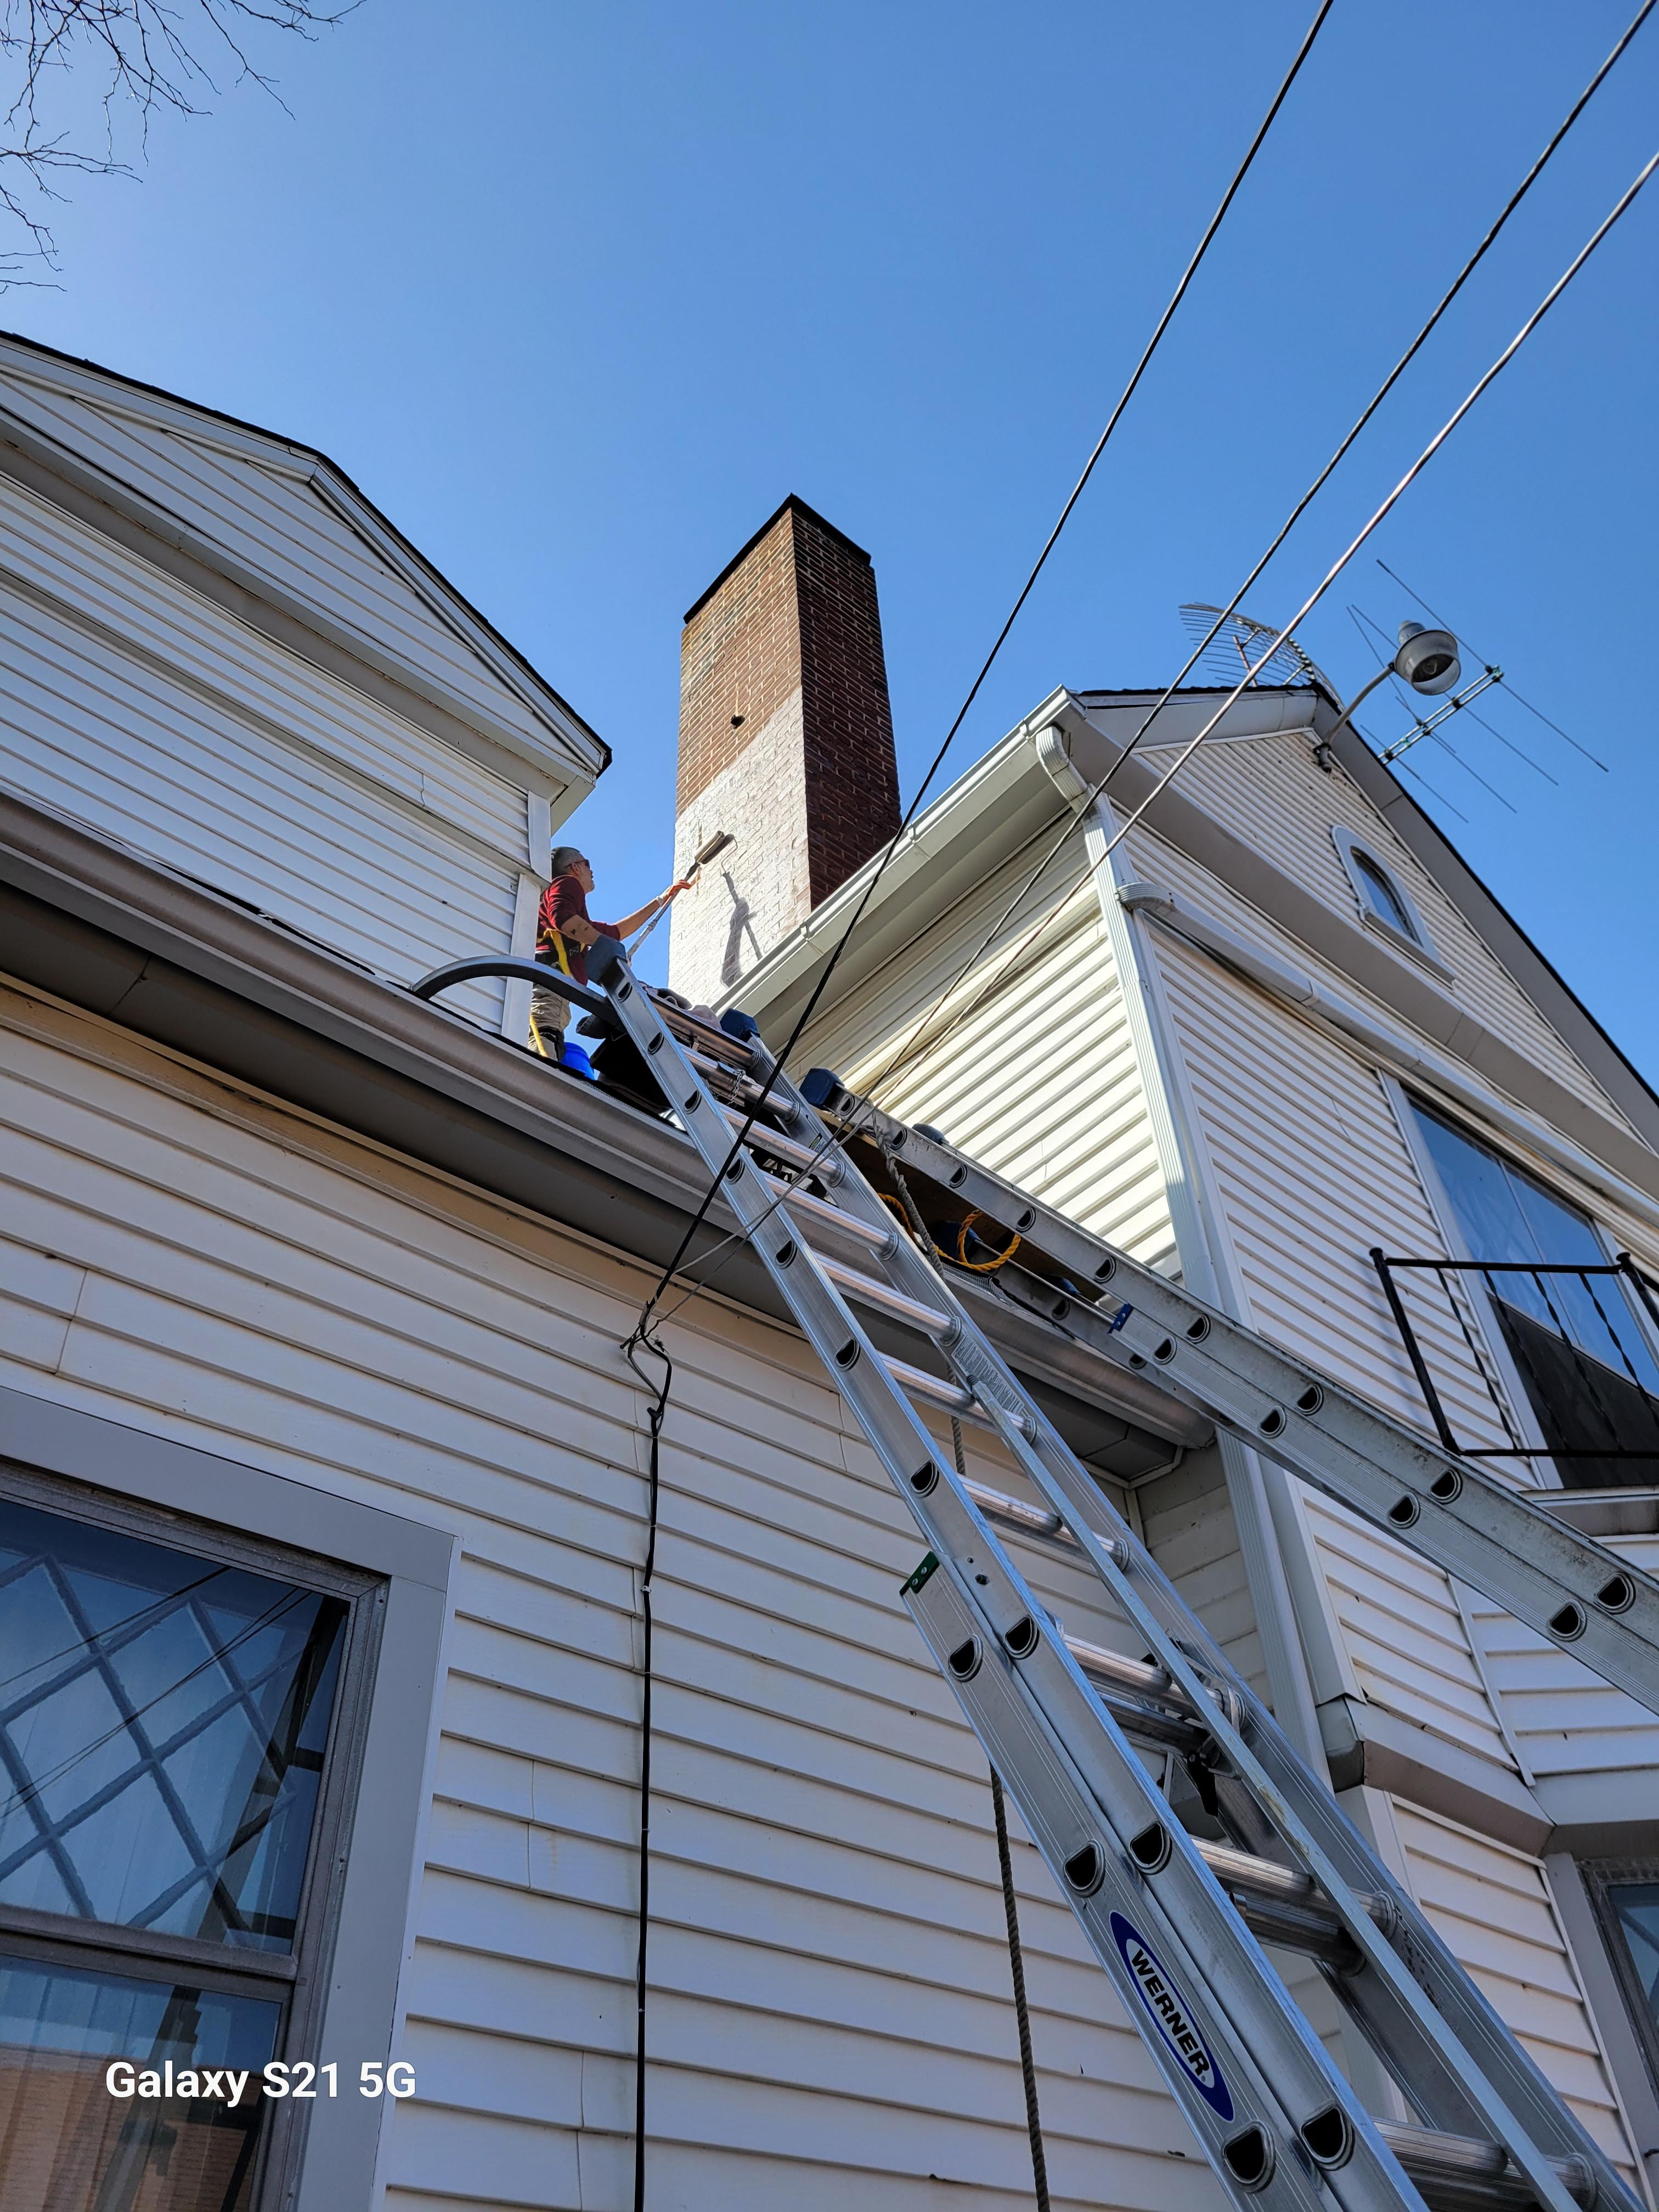 Exterior Painting for Roman Painting in Windham, Ohio